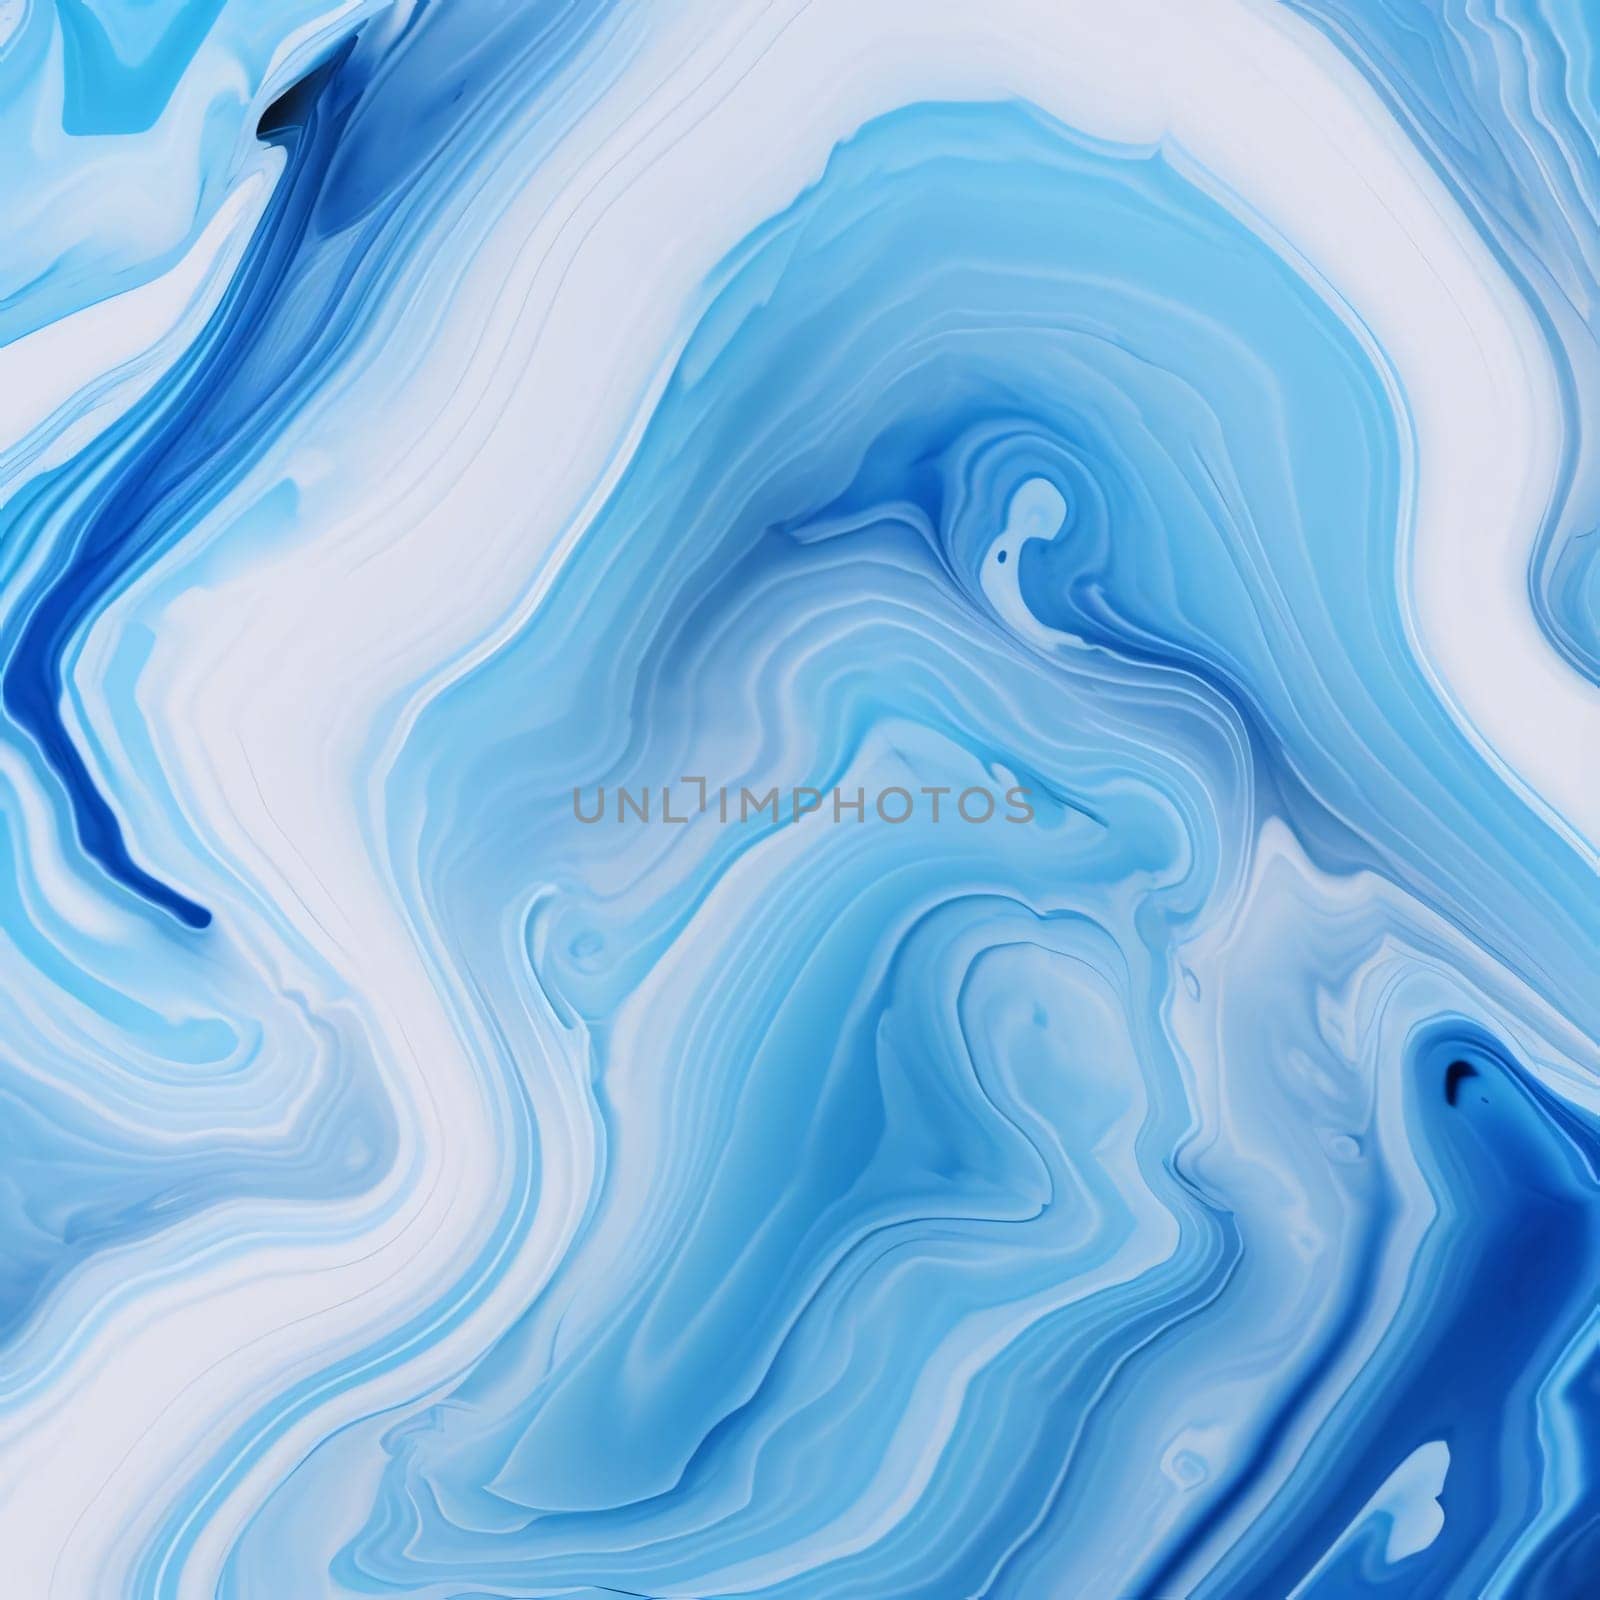 Abstract background design: Marble texture background. Abstract pattern with blue and white marble.